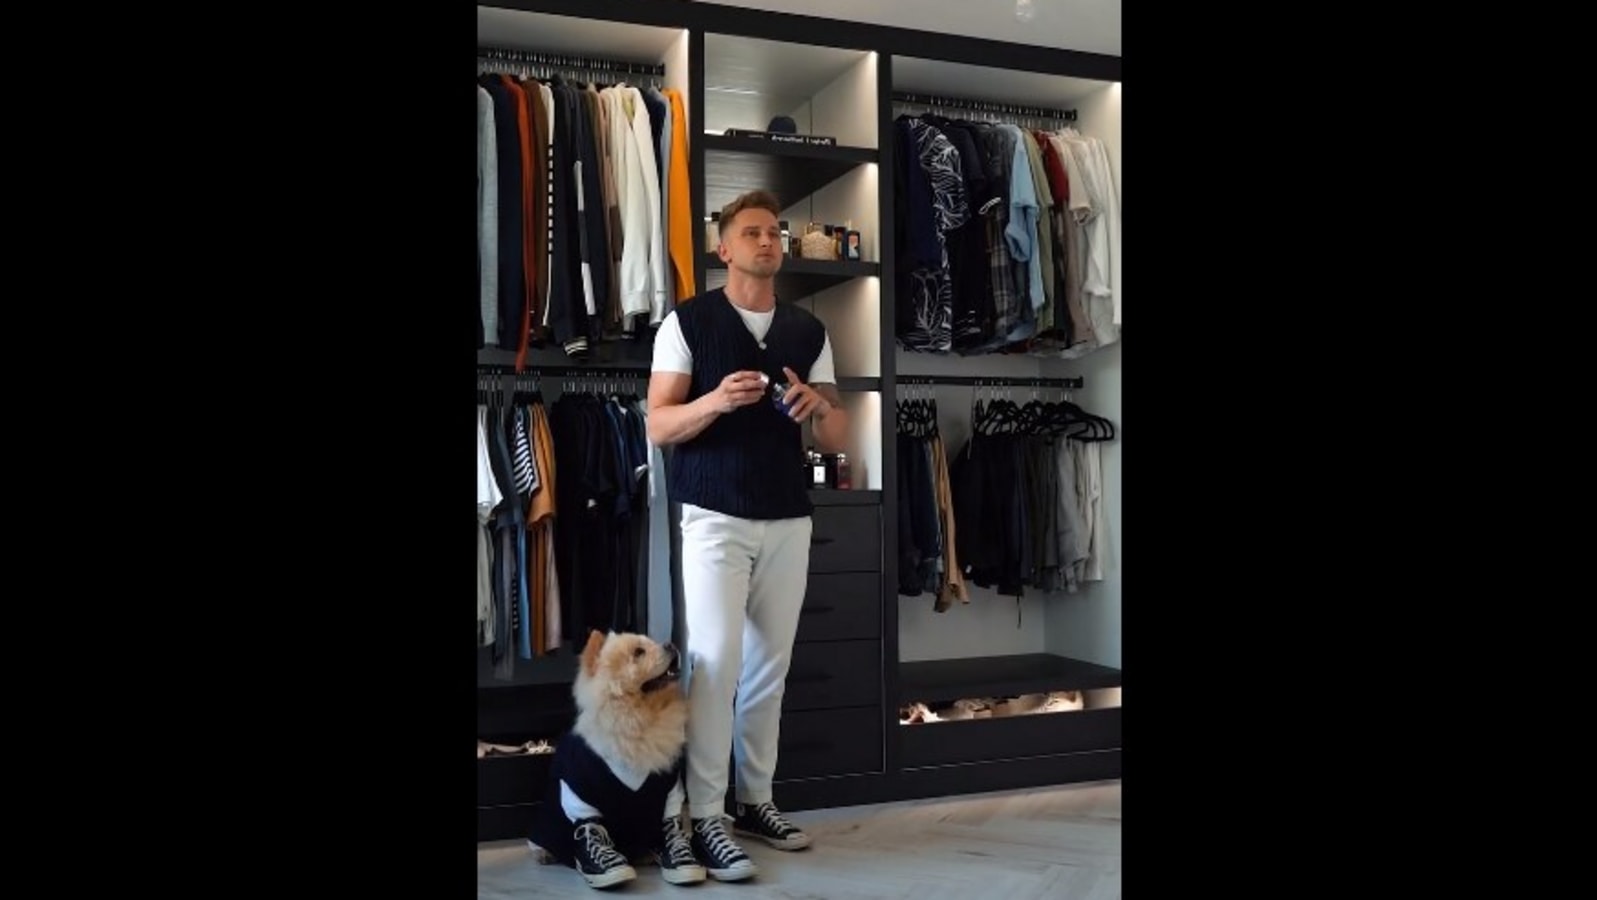 Man twinning with pet dog asks who wore it better. Watch video to ...